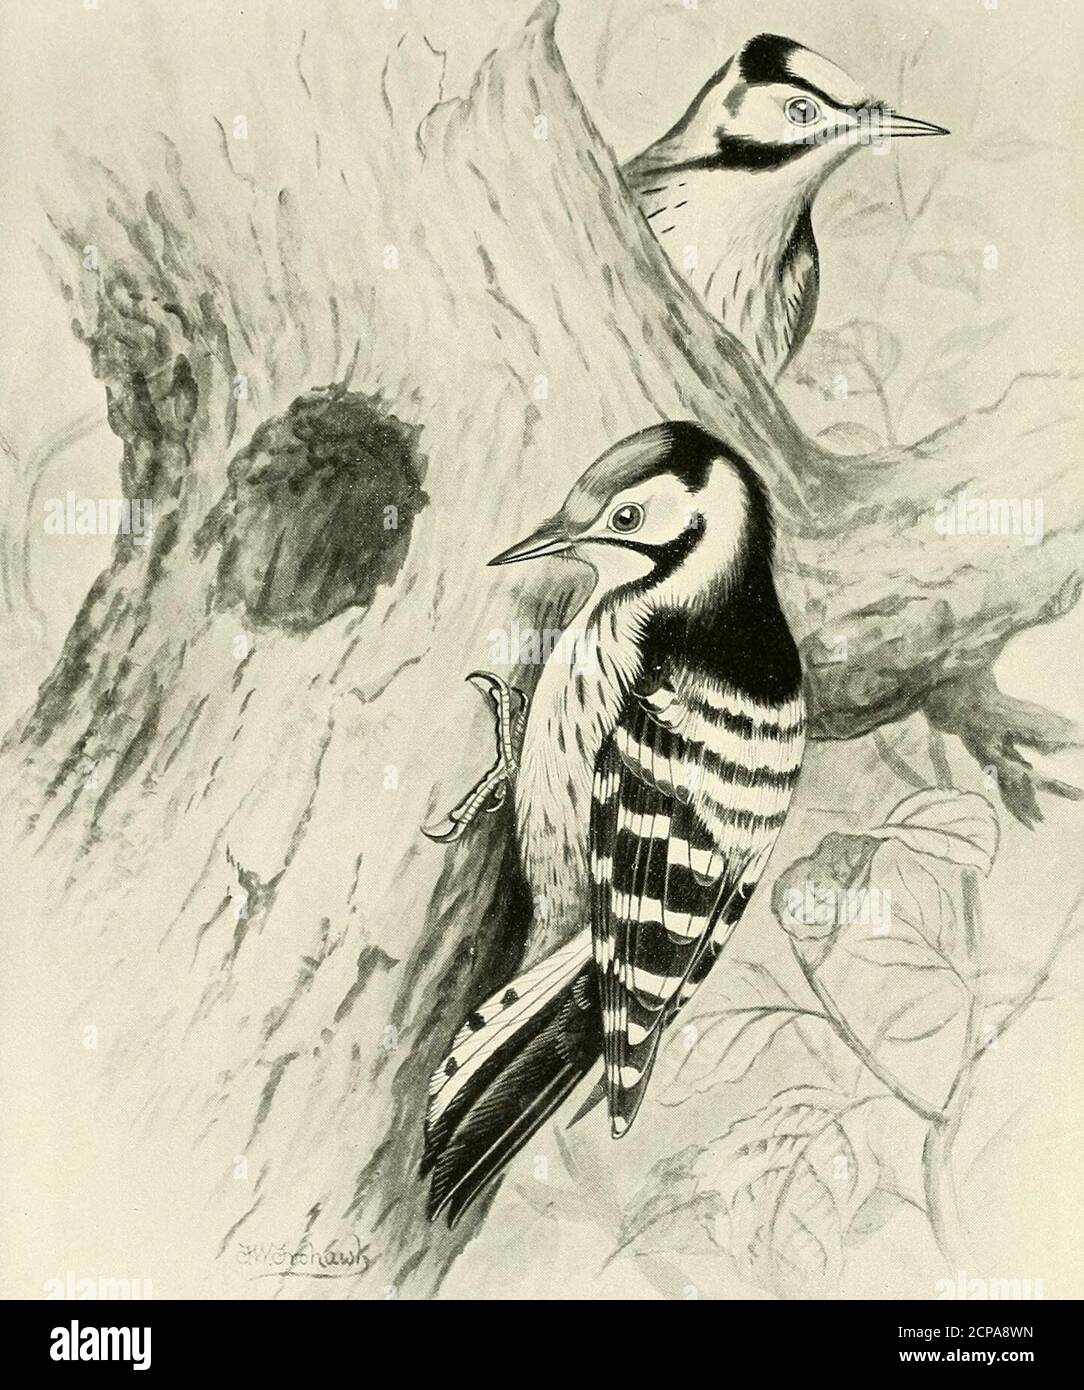 . British birds with their nests and eggs . (July 8th, 2 p.m.), the Wood-pecker is flitting from one strip of cork to another, uttering a cry which may berendered cack, cack; from time to time he darts his long tongue into thecrevices of cork. July 9th. It is noticeable that when the Woodpecker wishes to descend,he slides down the cork in jerks, tail downwards, like his wild brethren, incontradistinction to the Nuthatch. Strawberries pushed to him- in the cleft-switch he accepts gratefully; a moment ago he nearly choked in trying toswallow a large husk, and, now that his shyness is working off Stock Photo